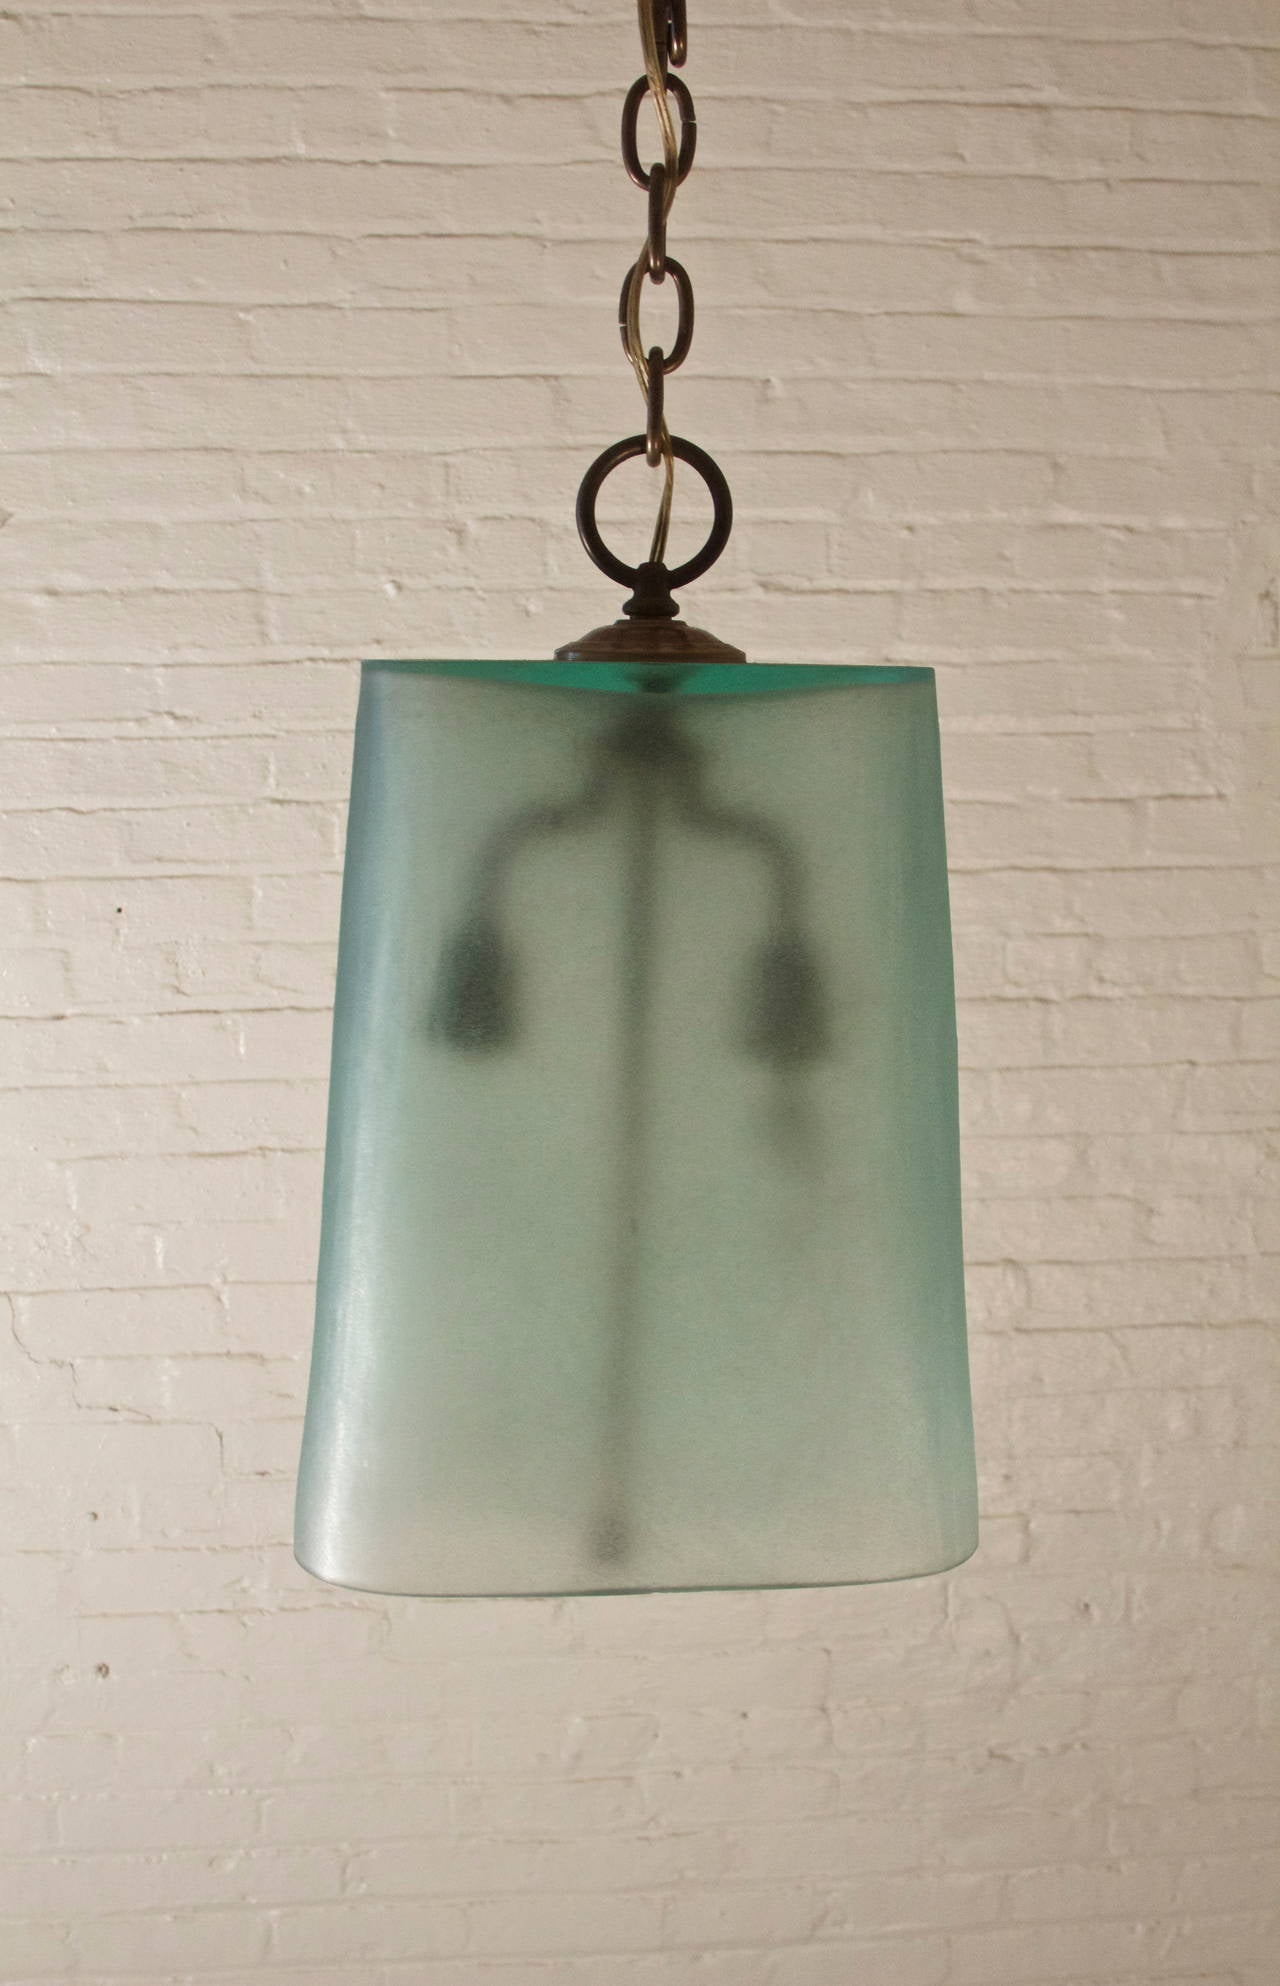 Unique Italian pendant light with gracefully-shaped Corroso glass form in subtle semi-transparent green tone and two symmetrical bronze branches with floral collars; supported by bronze chain. Original fixtures-working condition.